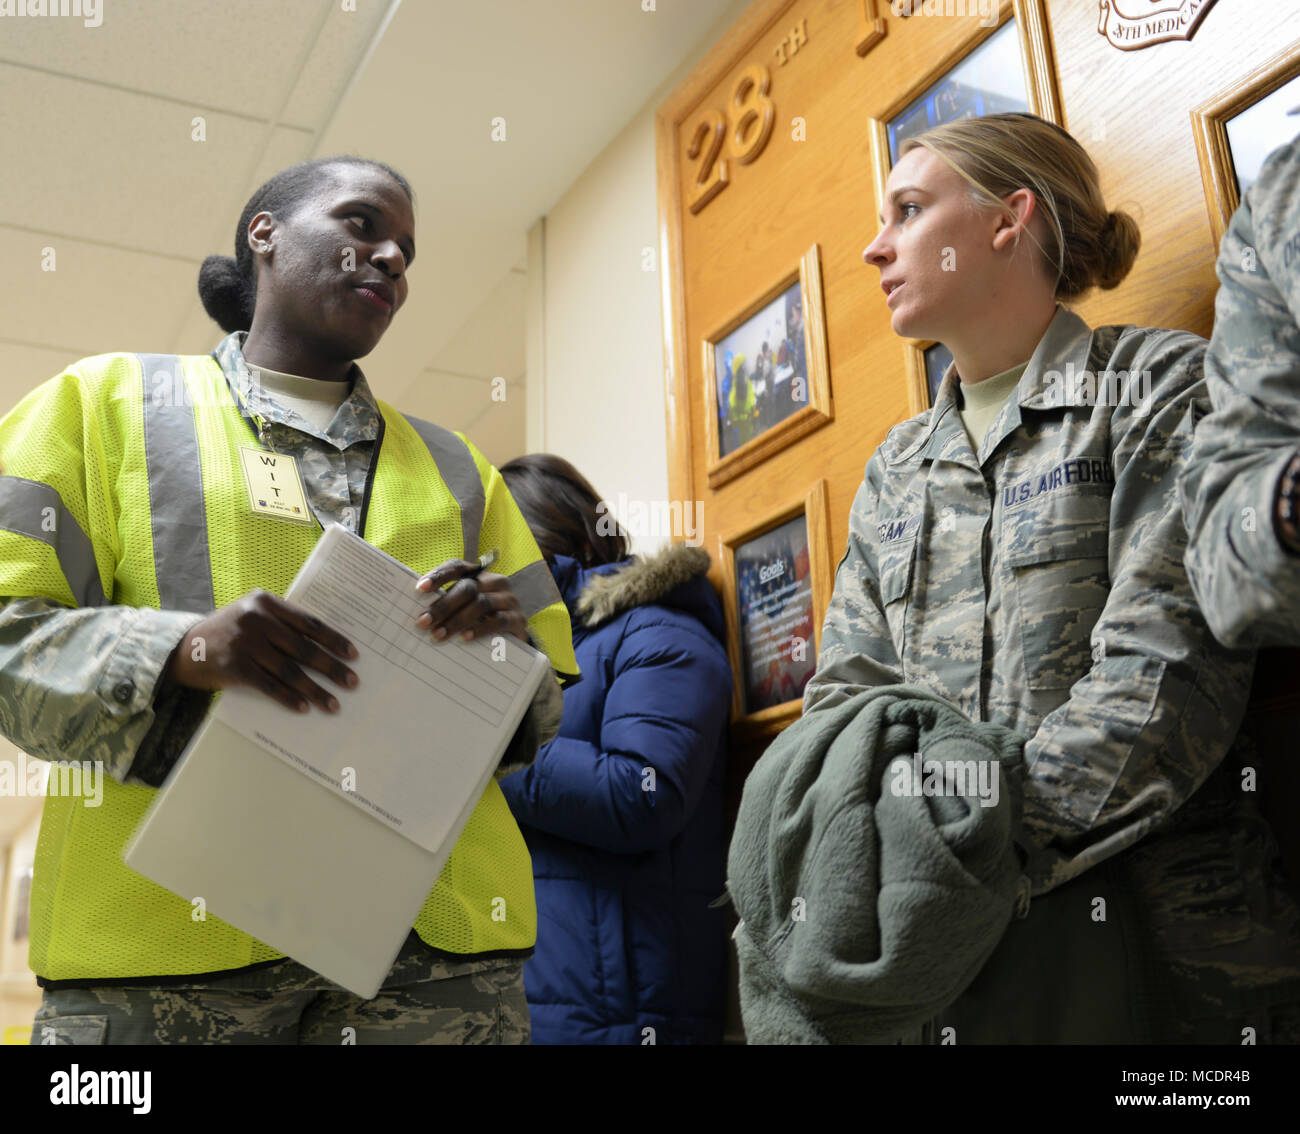 Master Sgt. Jvalyn Vaughn, a wing inspection team member, talks to Senior Airman Chelsea Deegan, a 28th Medical Operations Squadron aerospace medical technician, during an active shooter exercise inside the 28th Medical Group at Ellsworth Air Force Base, S.D., Feb. 22, 2018. Ellsworth AFB conducted an active shooter exercise, testing Airmen in nearly 20 locations on their ability to respond to different situations in their buildings. (U.S. Air Force photo by Senior Airman Michella Stowers) Stock Photo